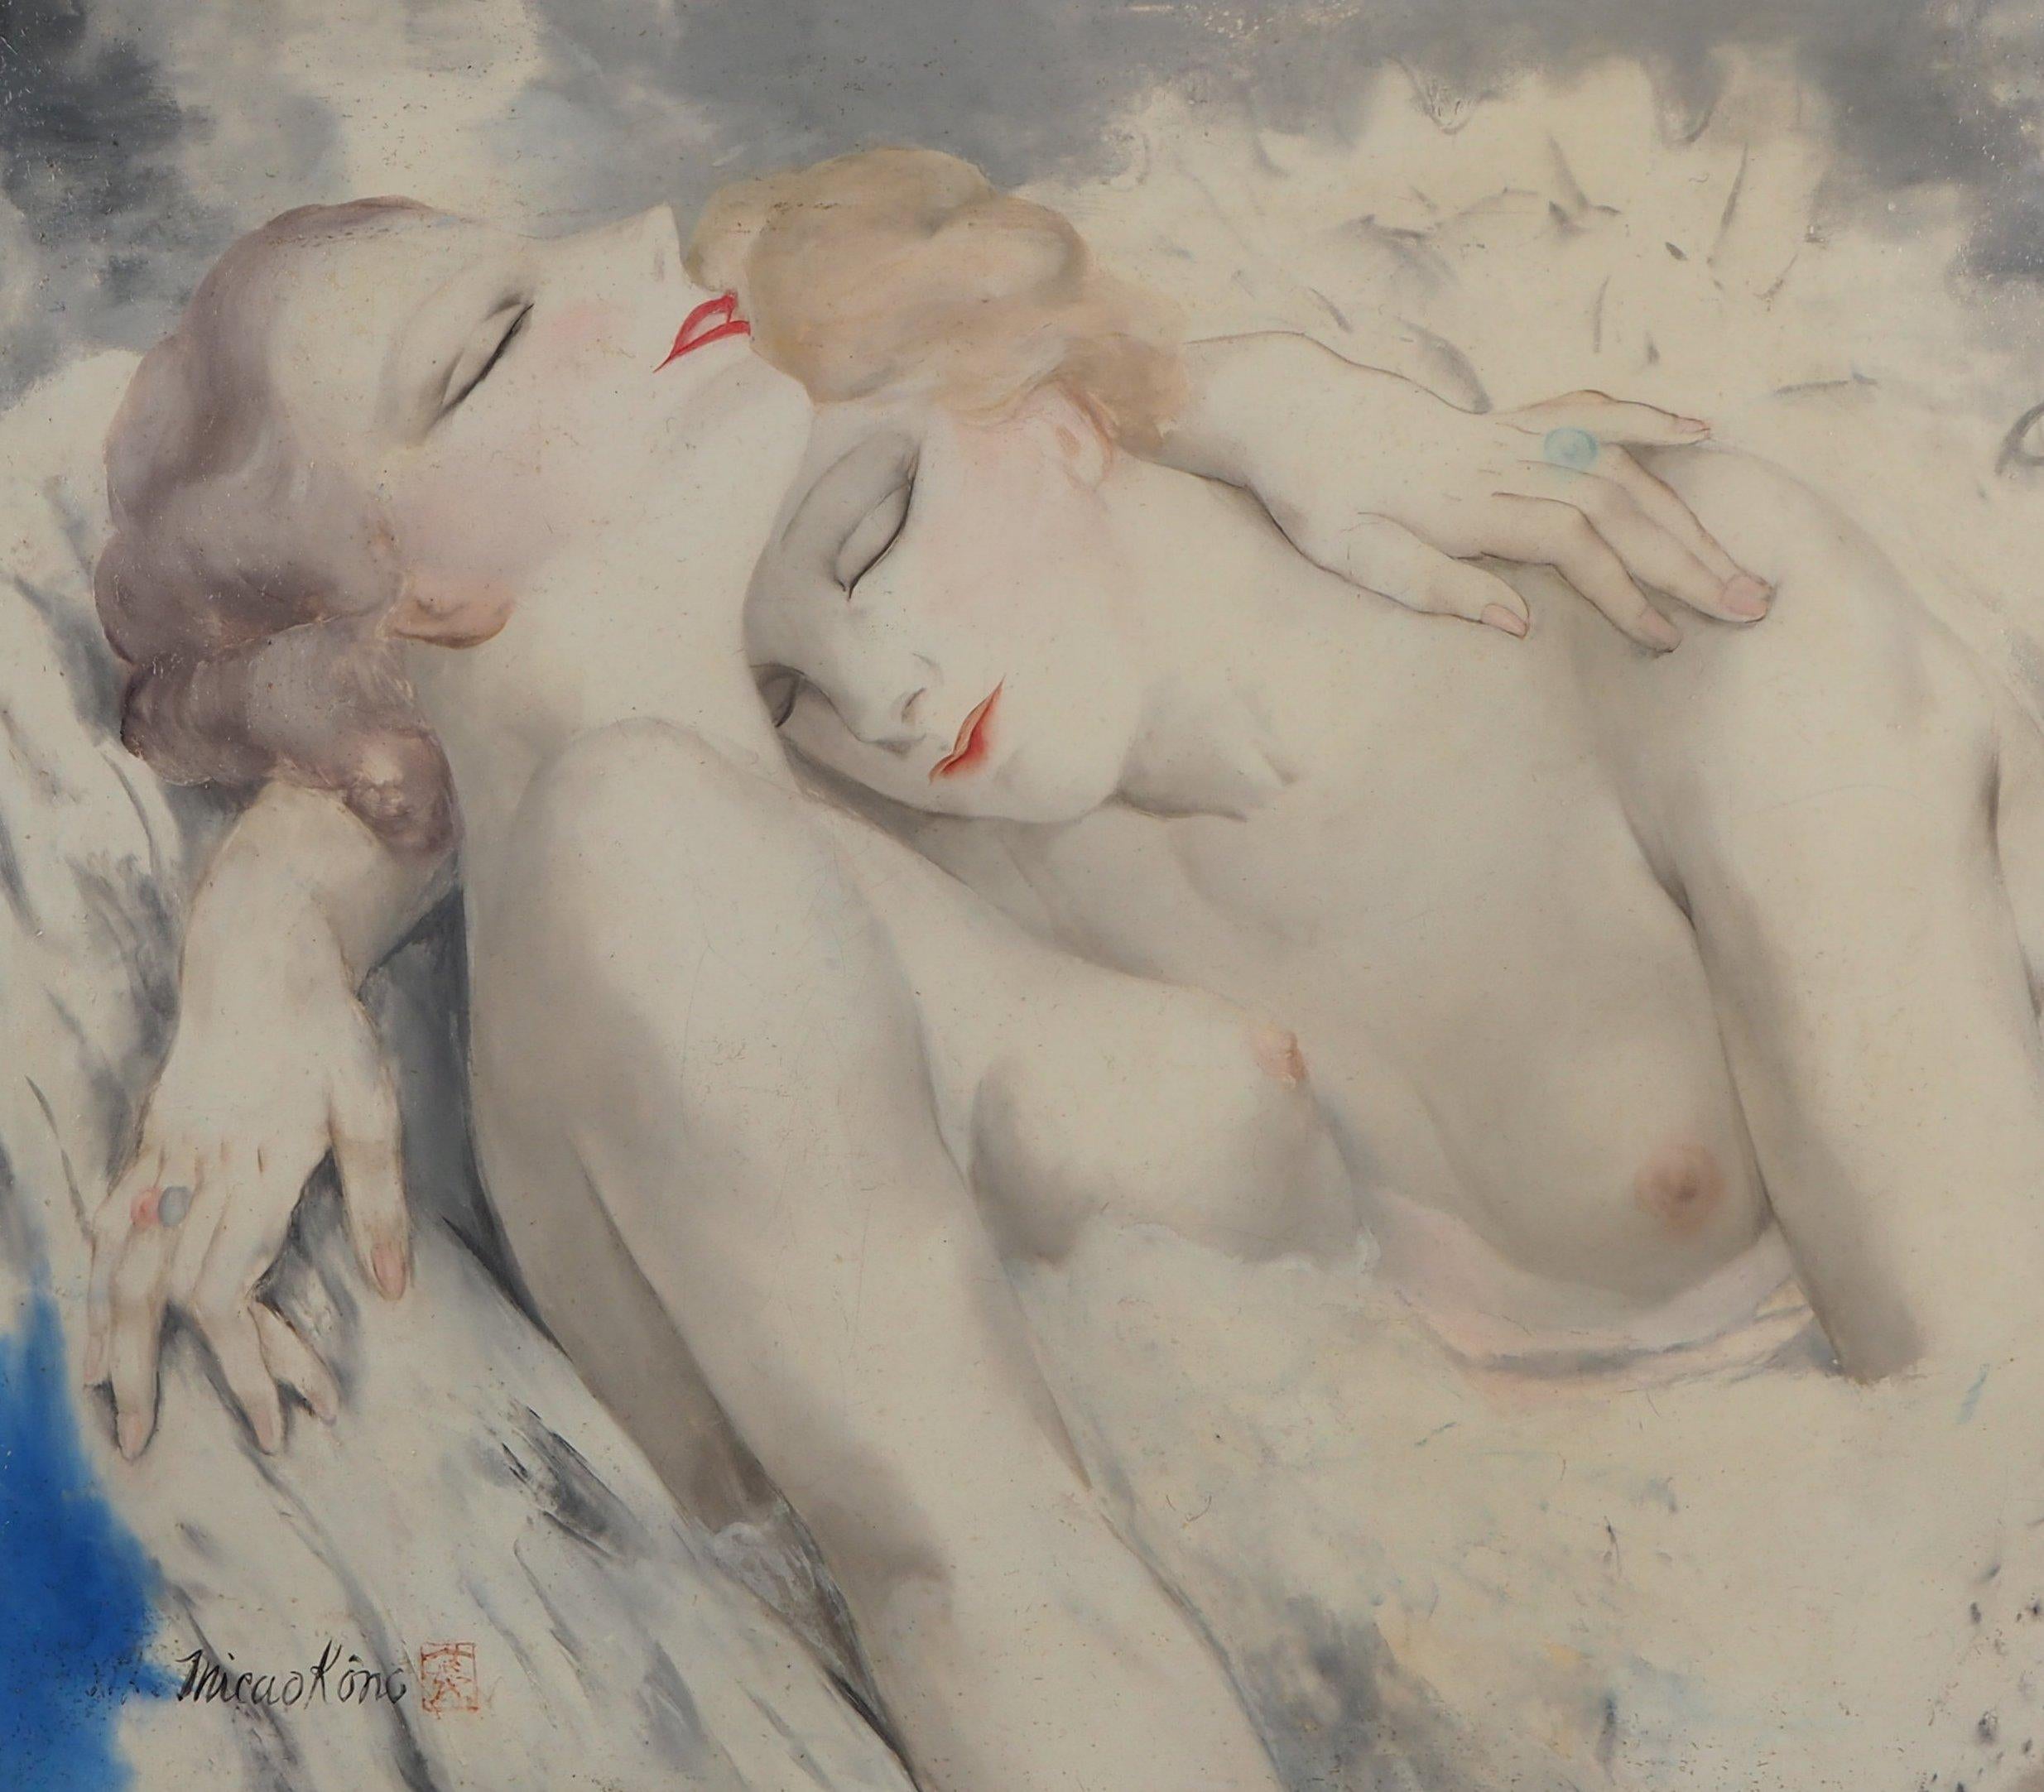 Asleep Ballerinas - Original Oil on Canvas - Signed - Modern Painting by Micao Kono